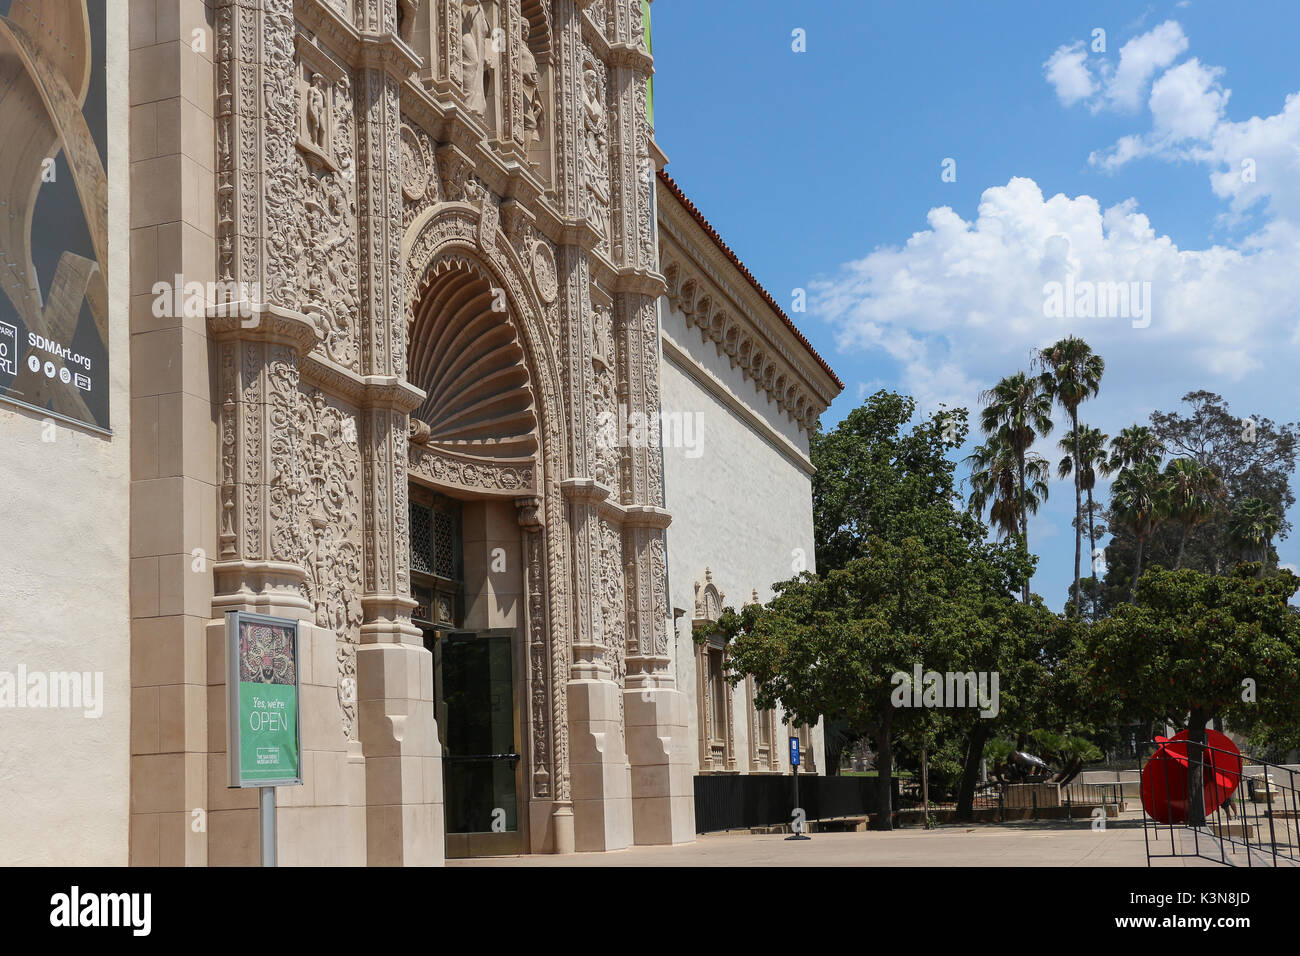 The highly decorated facade of the San Diego Museum of Art in San Diego, California, was designed in a Spanish-Renaissance architectural style. Stock Photo